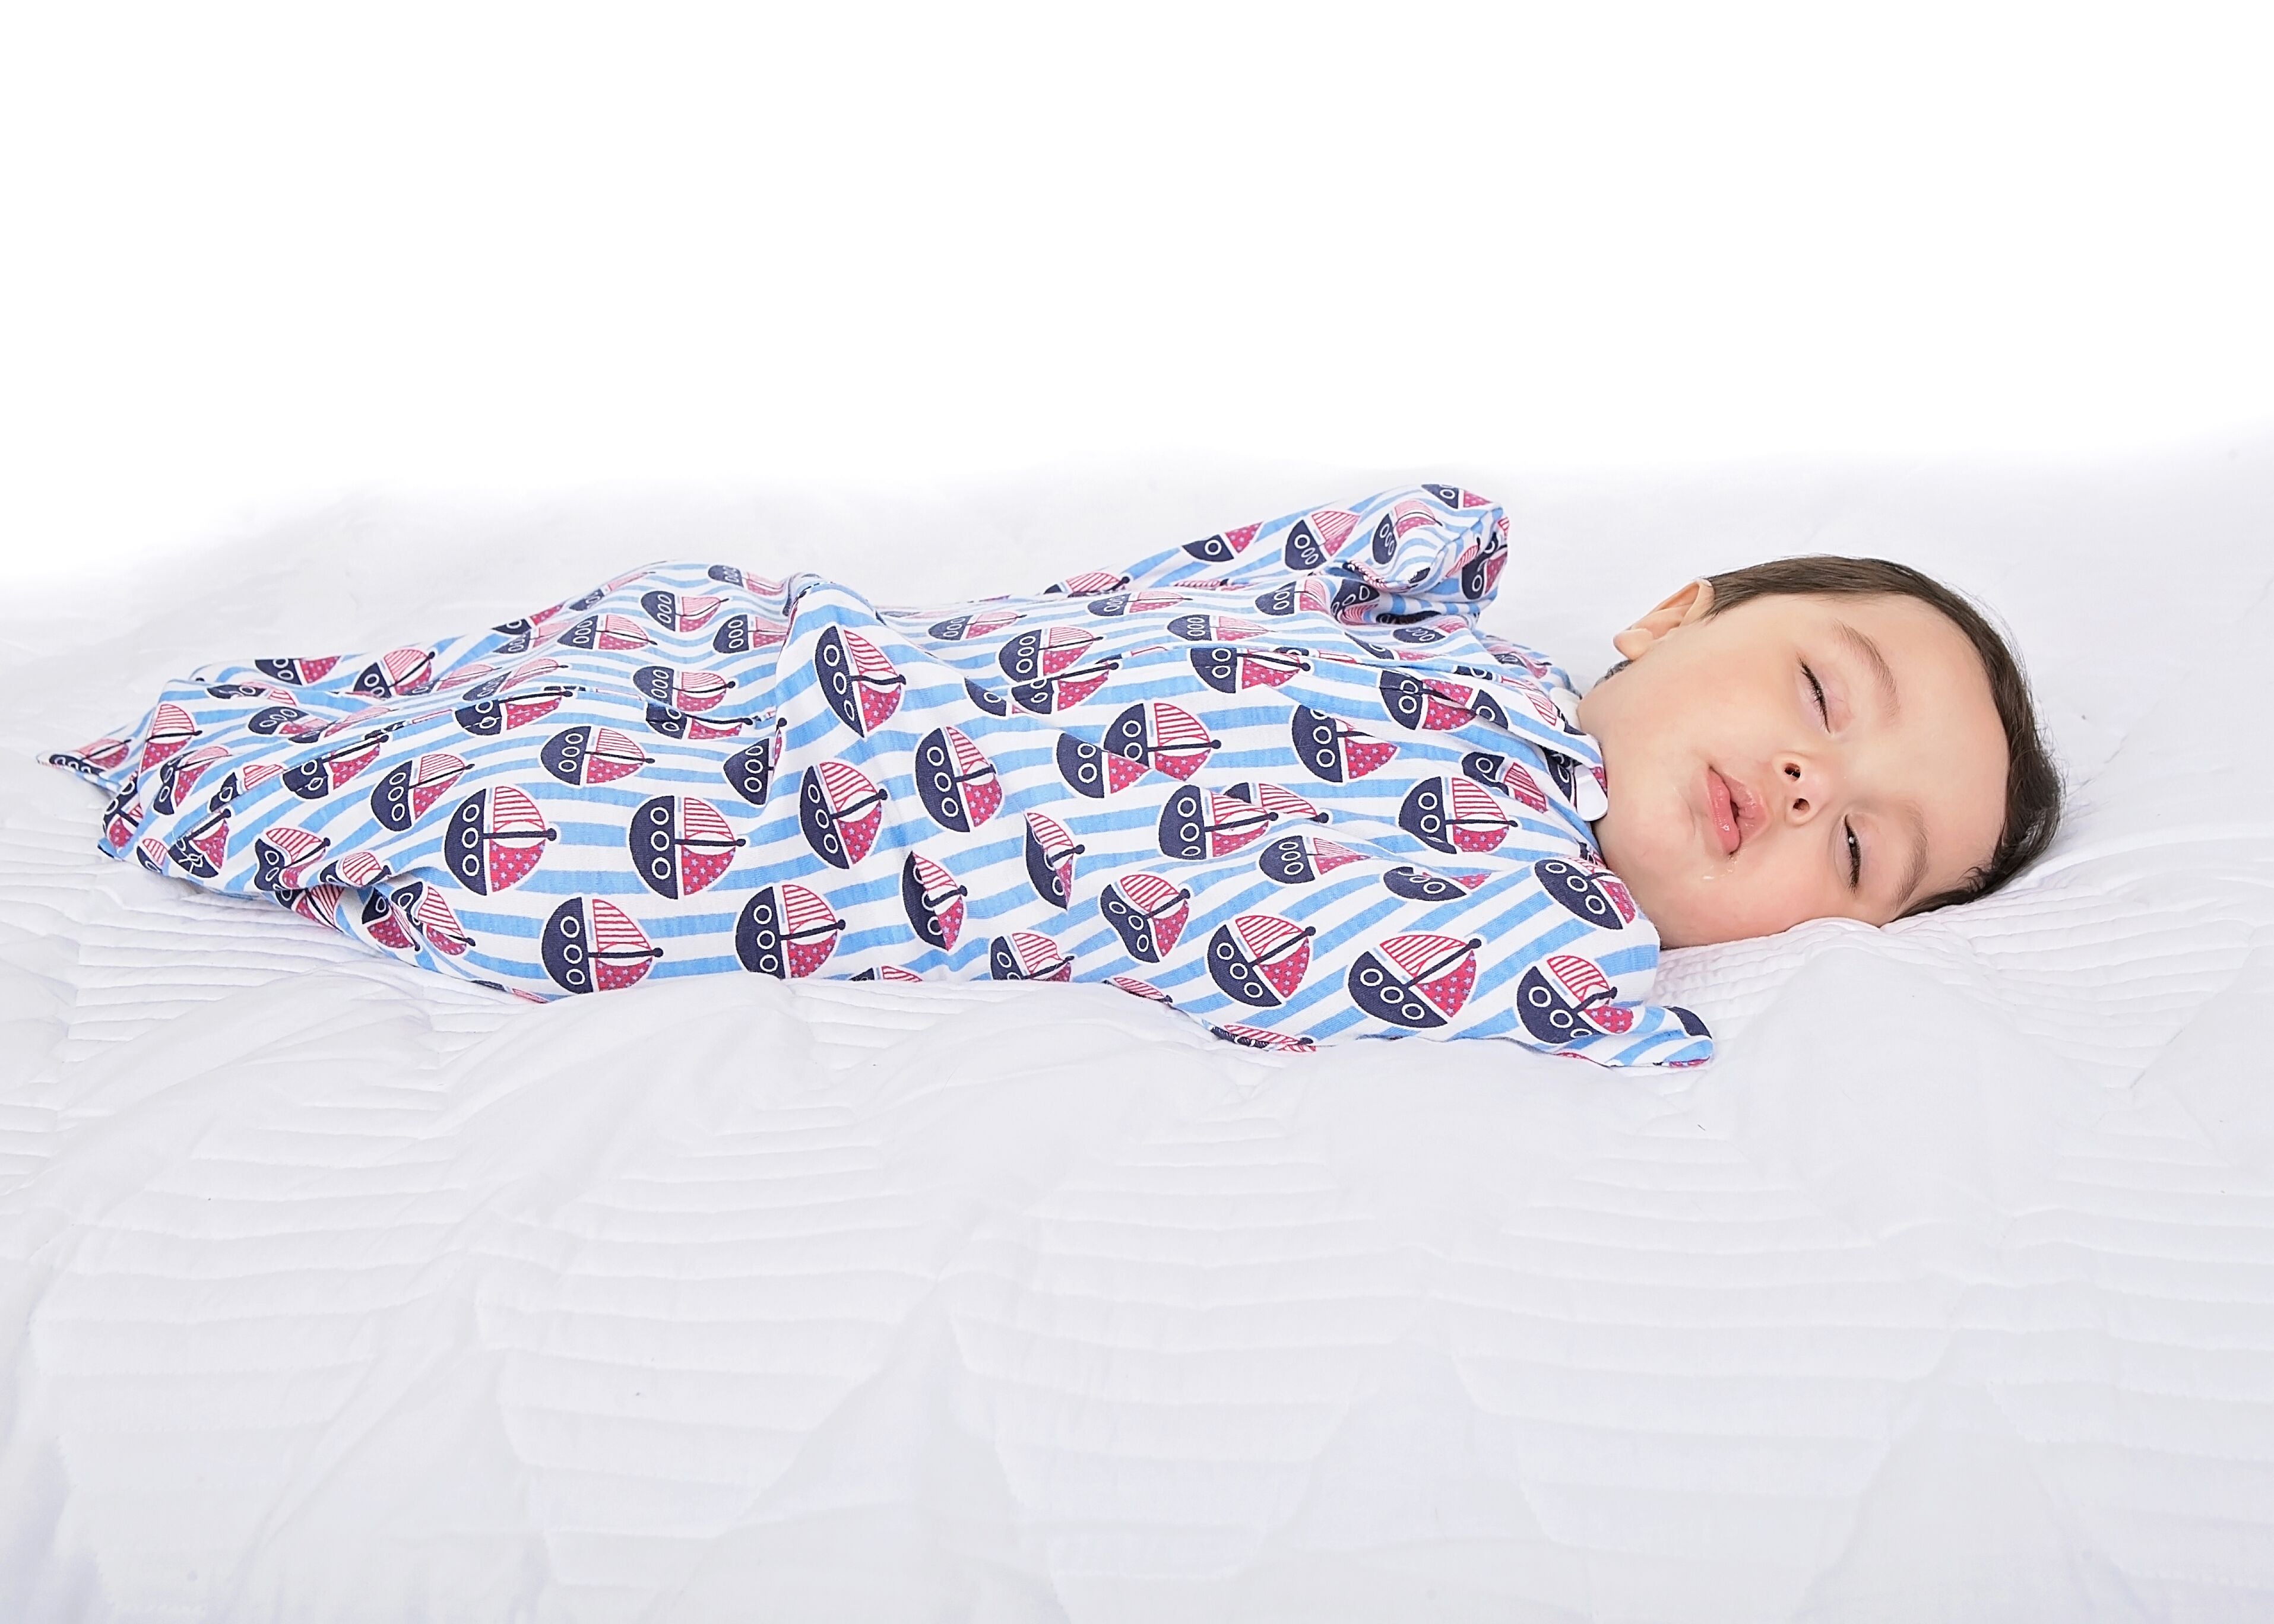 What Should My Baby Wear to Sleep? — The Right Products for the